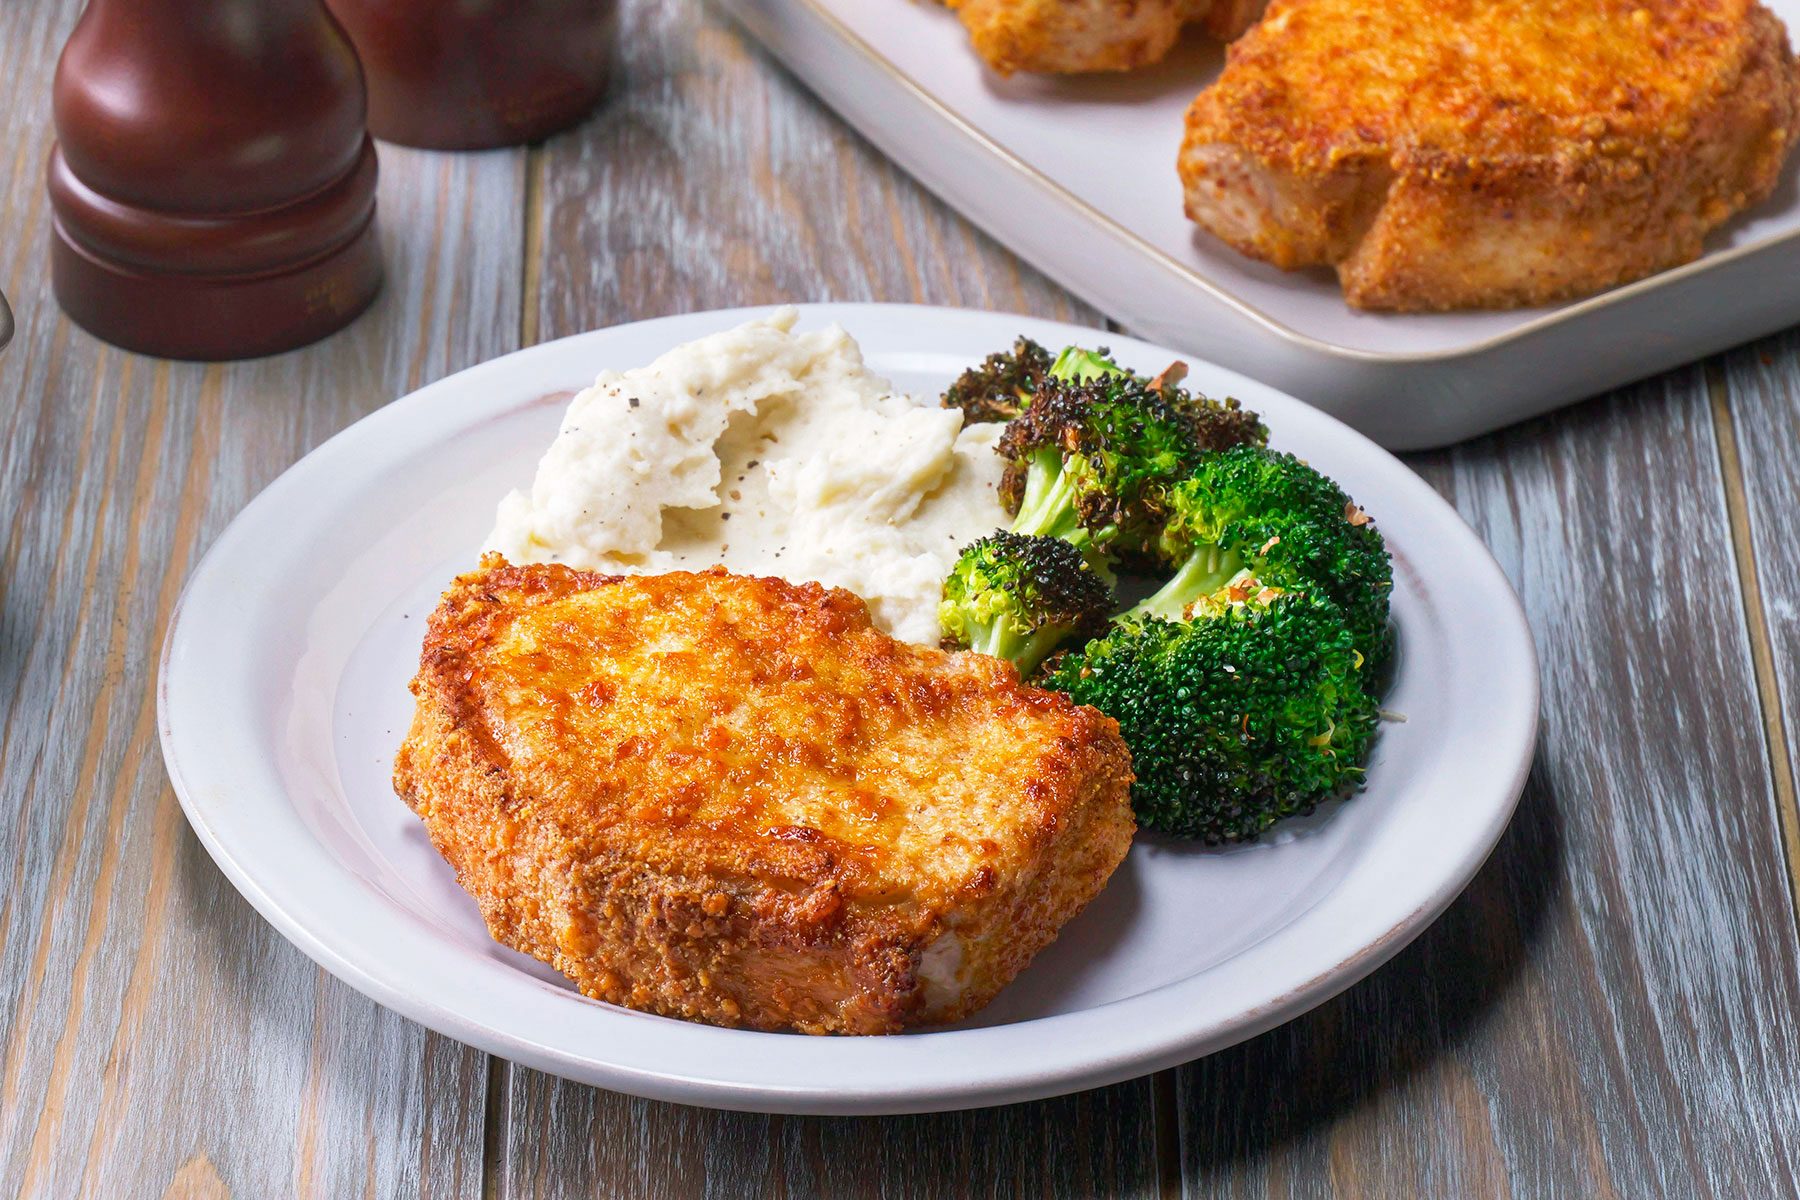 Pork Chops on Plate with Broccoli and Mashed Potato